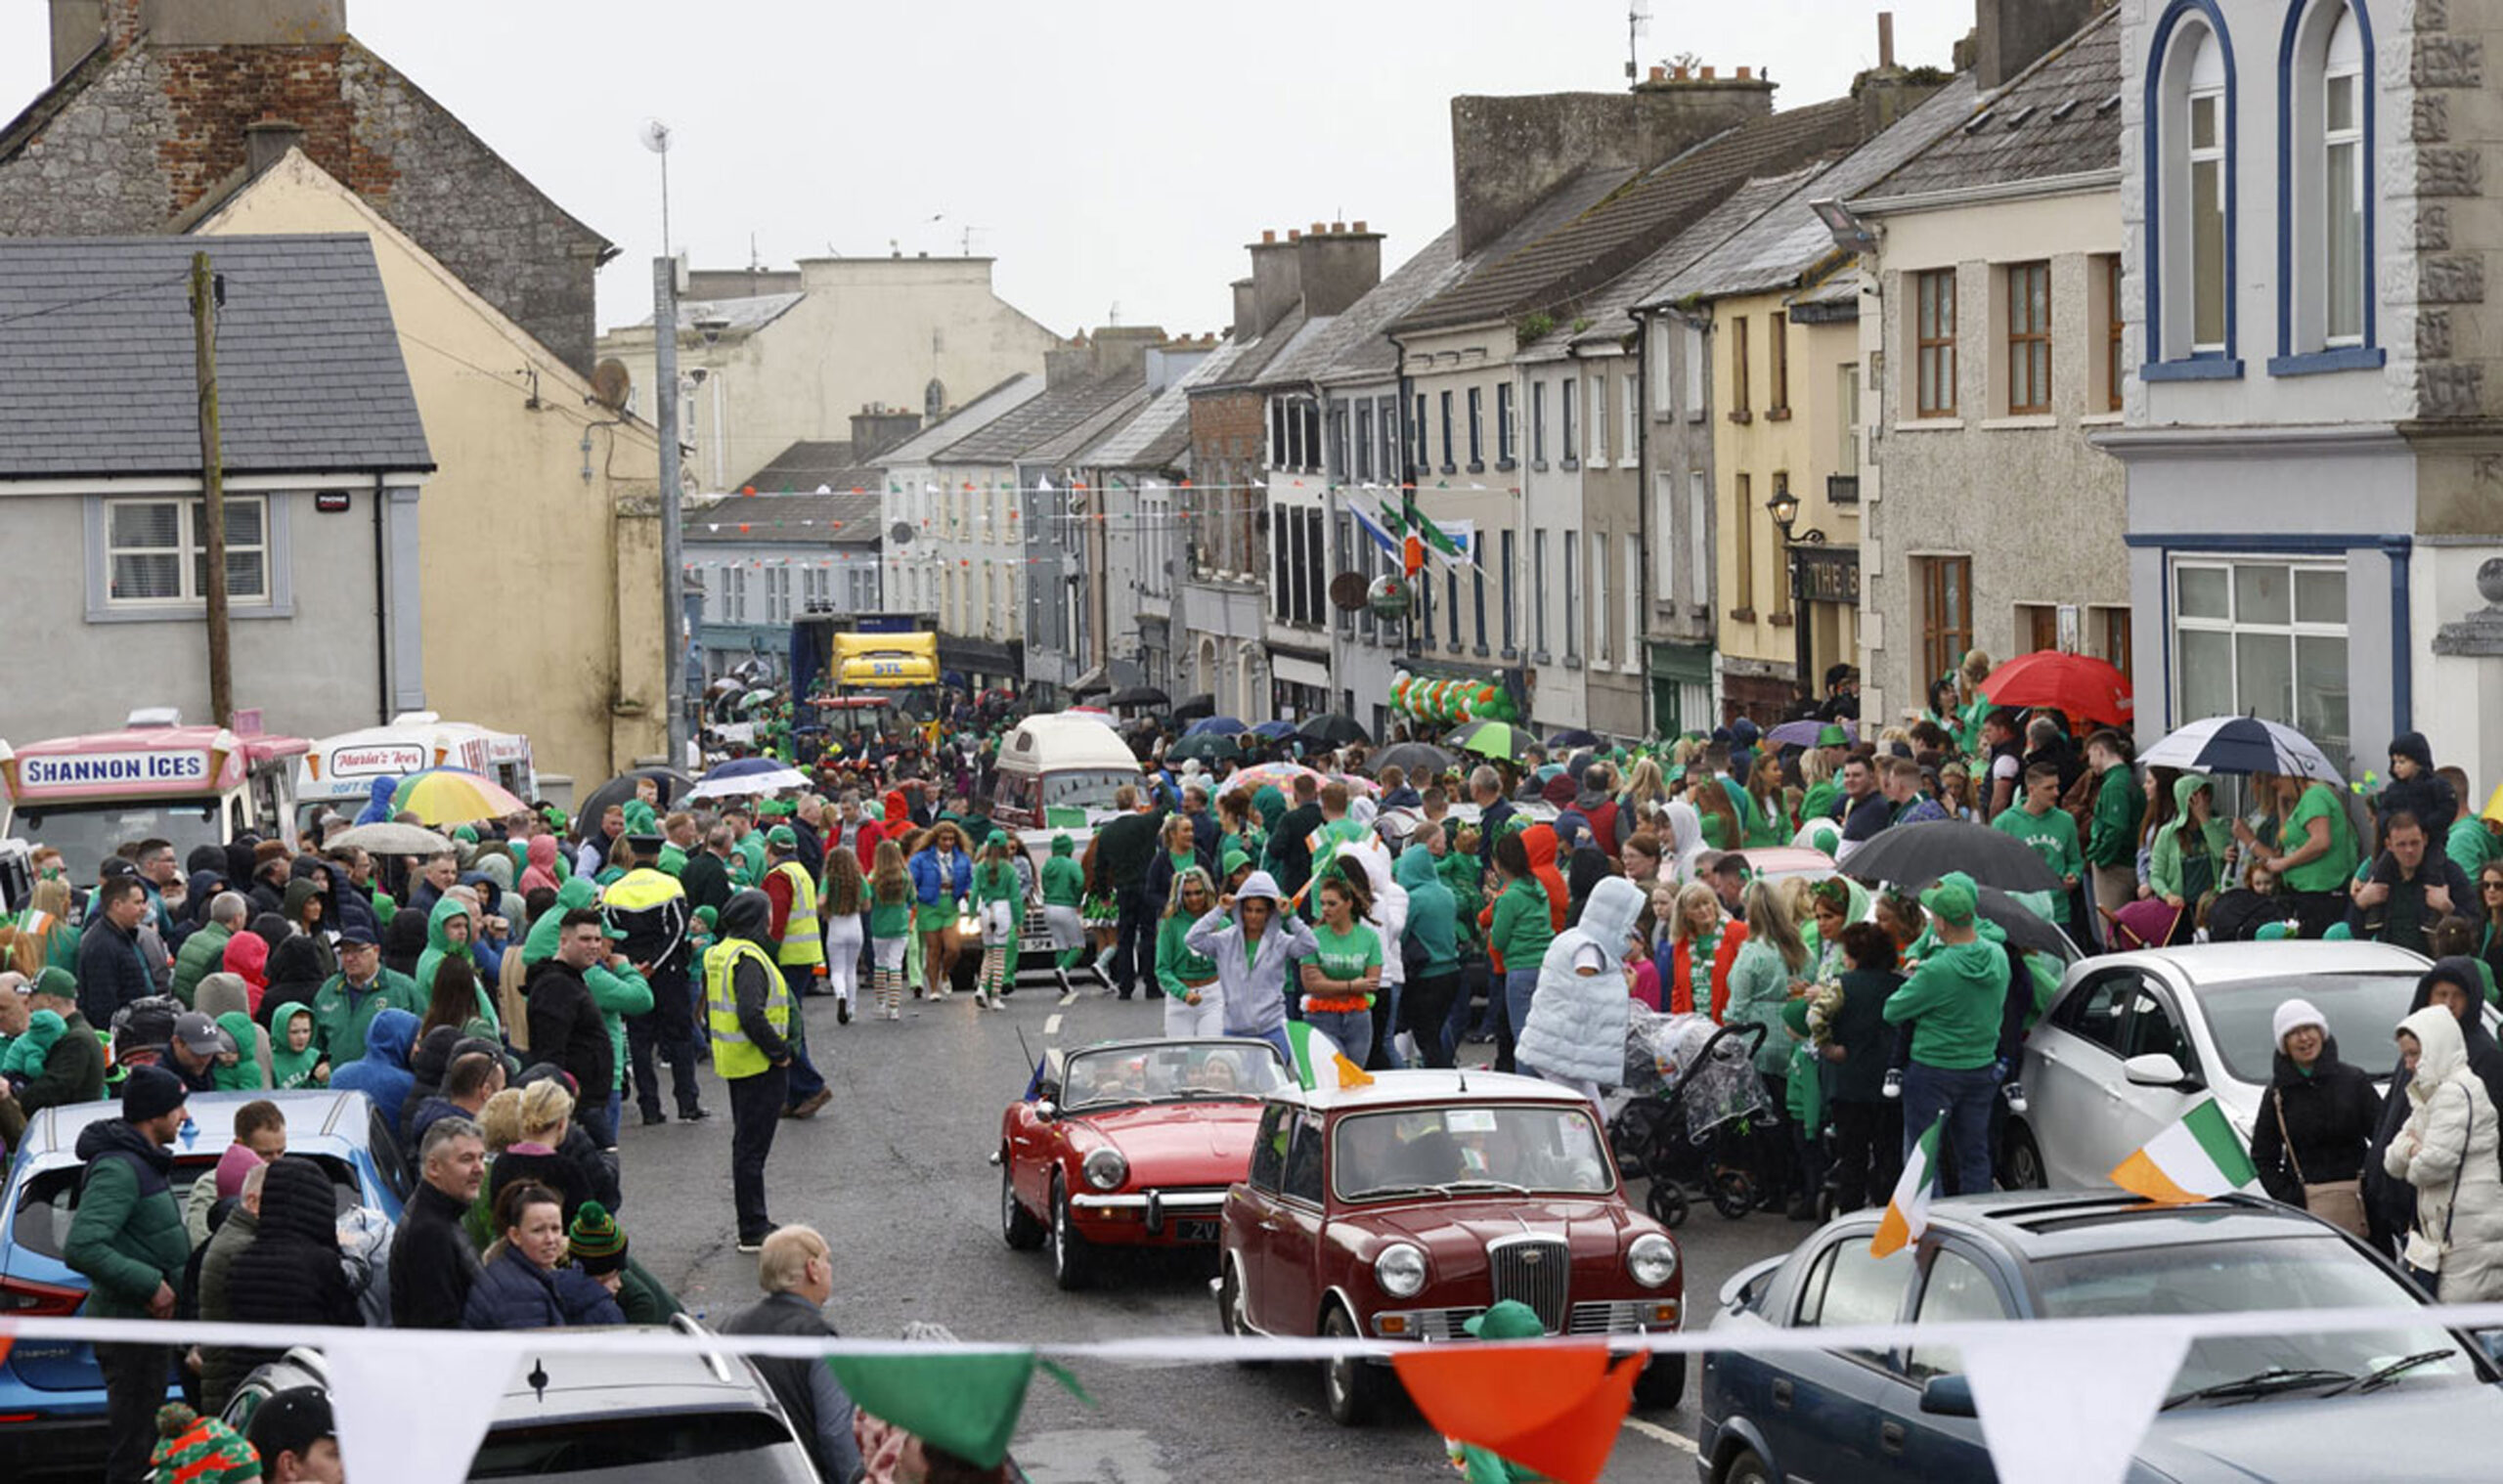 Led by all-Ireland Niall McInerney Cup winners, Coláiste na Trócaire, Rathkeale's St Patrick's Day Parade attracted thousands to celebrate the day